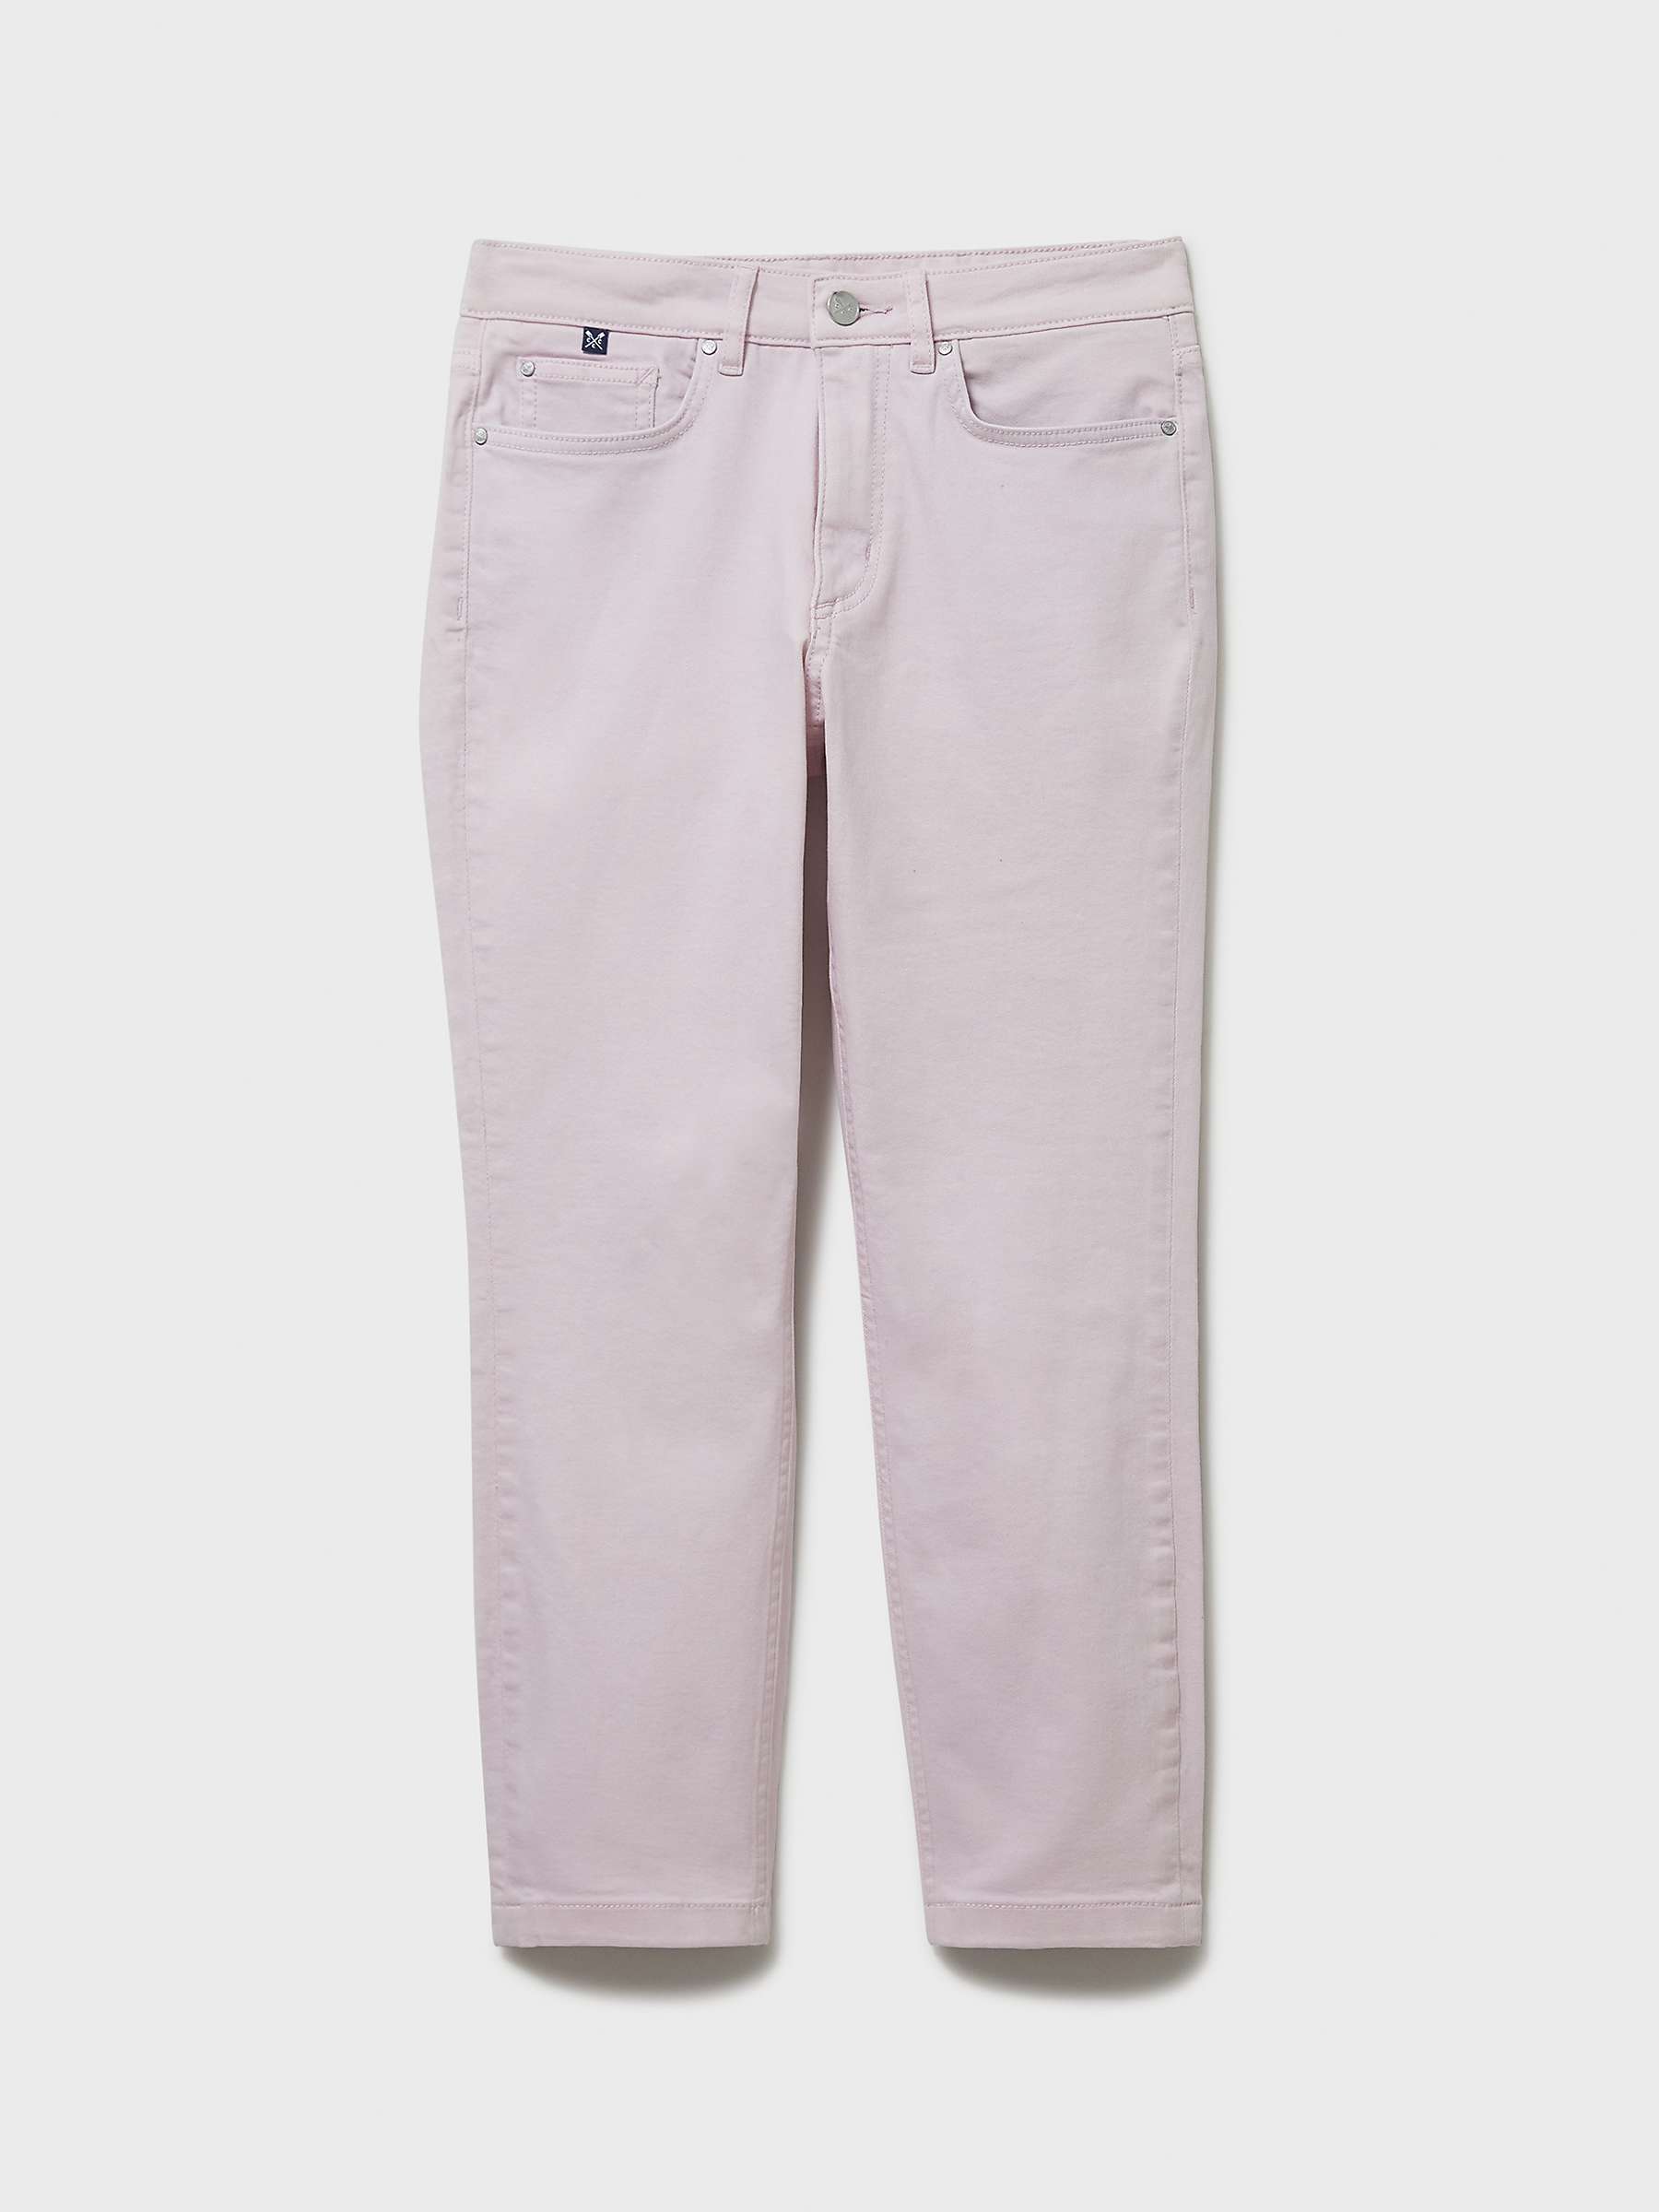 Buy Crew Clothing Cropped Stretch Jeans, Light Pink Online at johnlewis.com